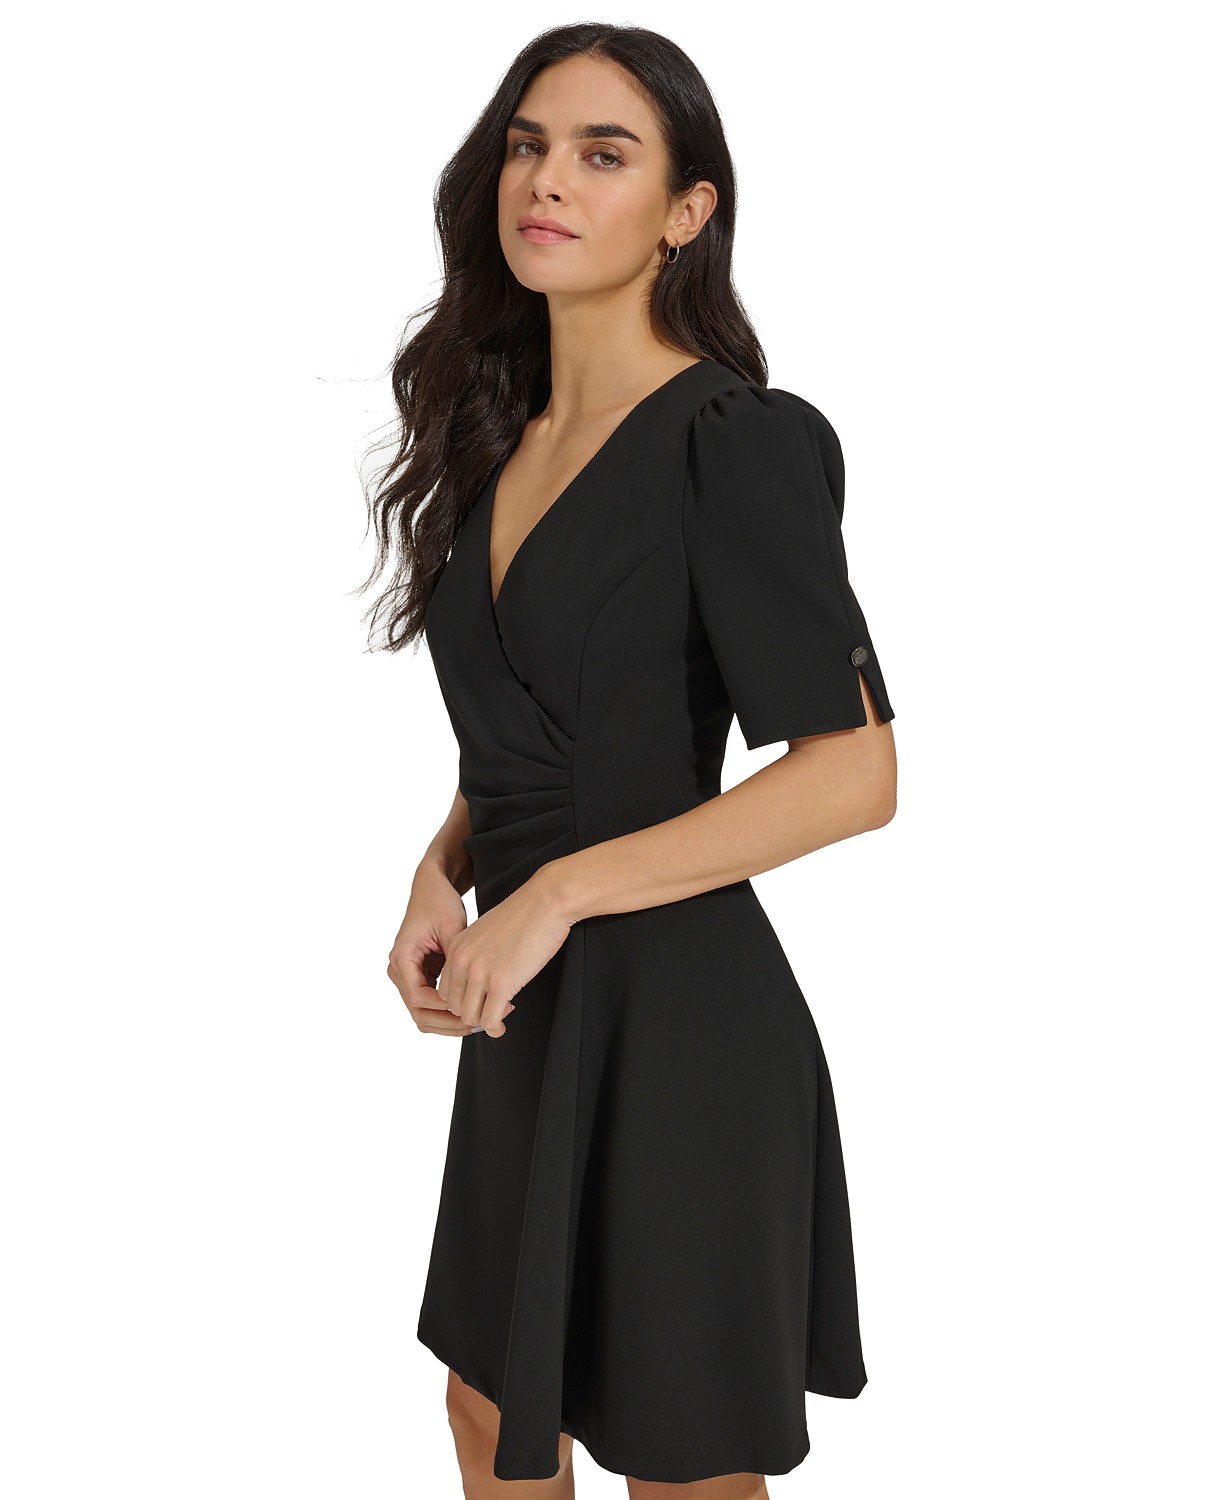 DKNY Womens Draped-Front Puff-Shoulder A-Line Dress